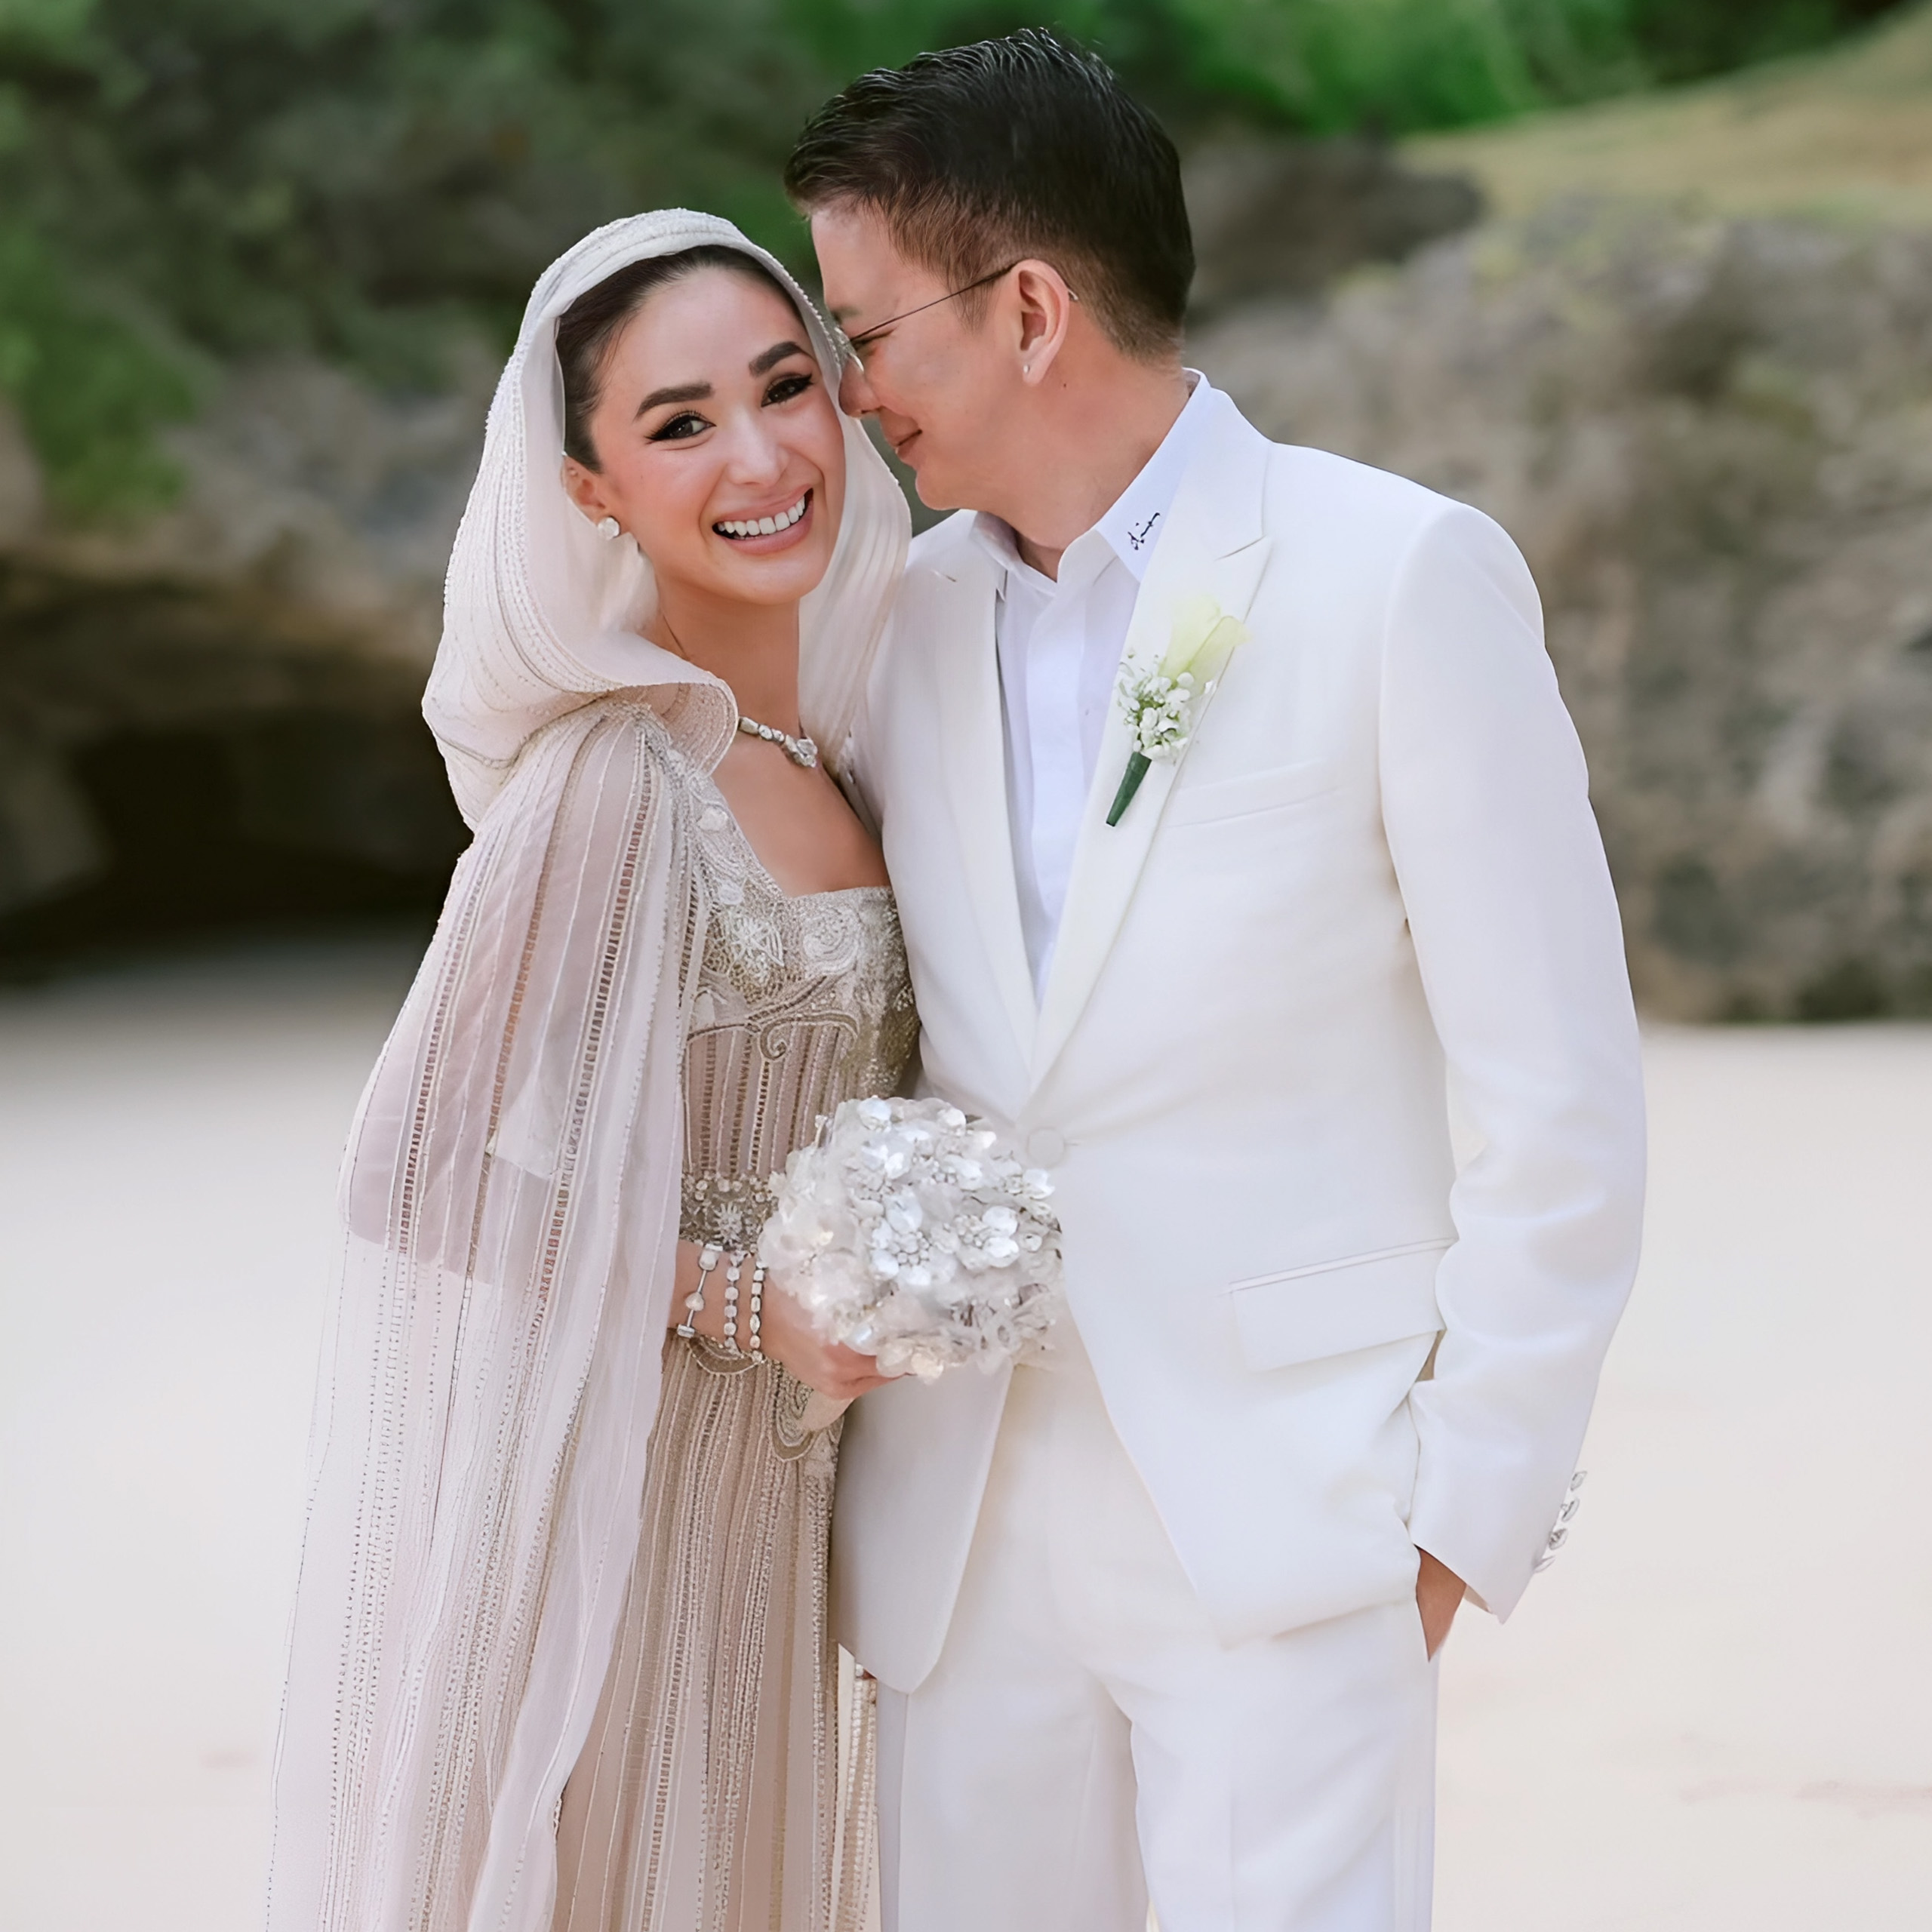 The Heart Evangelista and Chiz Escudero Wedding: What Changed and What Stayed the Same? 